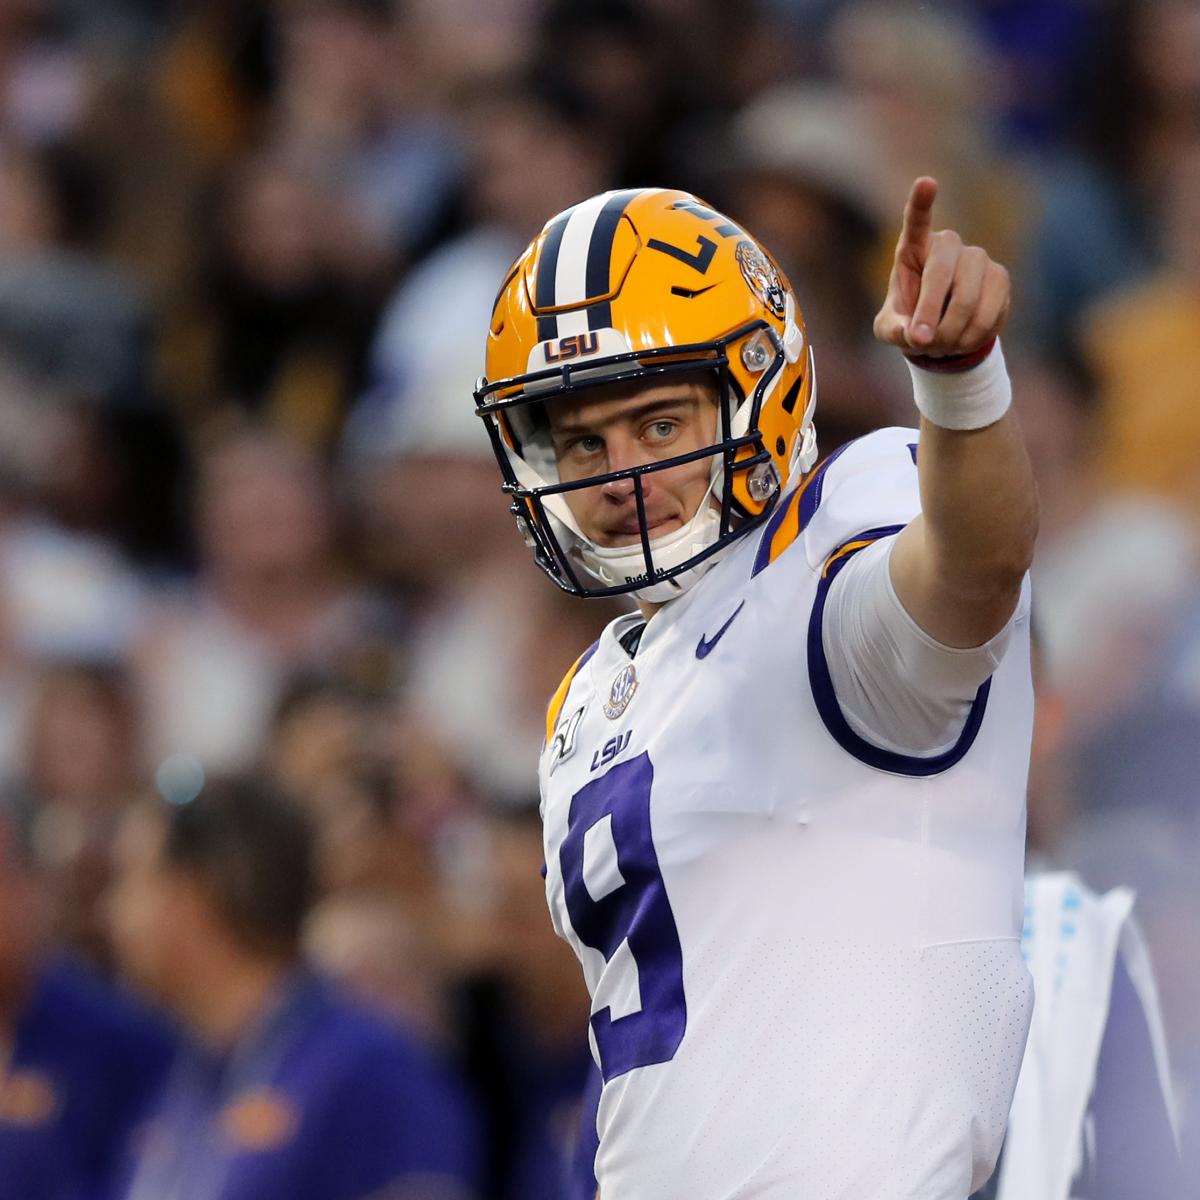 Cody Worsham on X: Nothing but respect for Joe Burrow and his